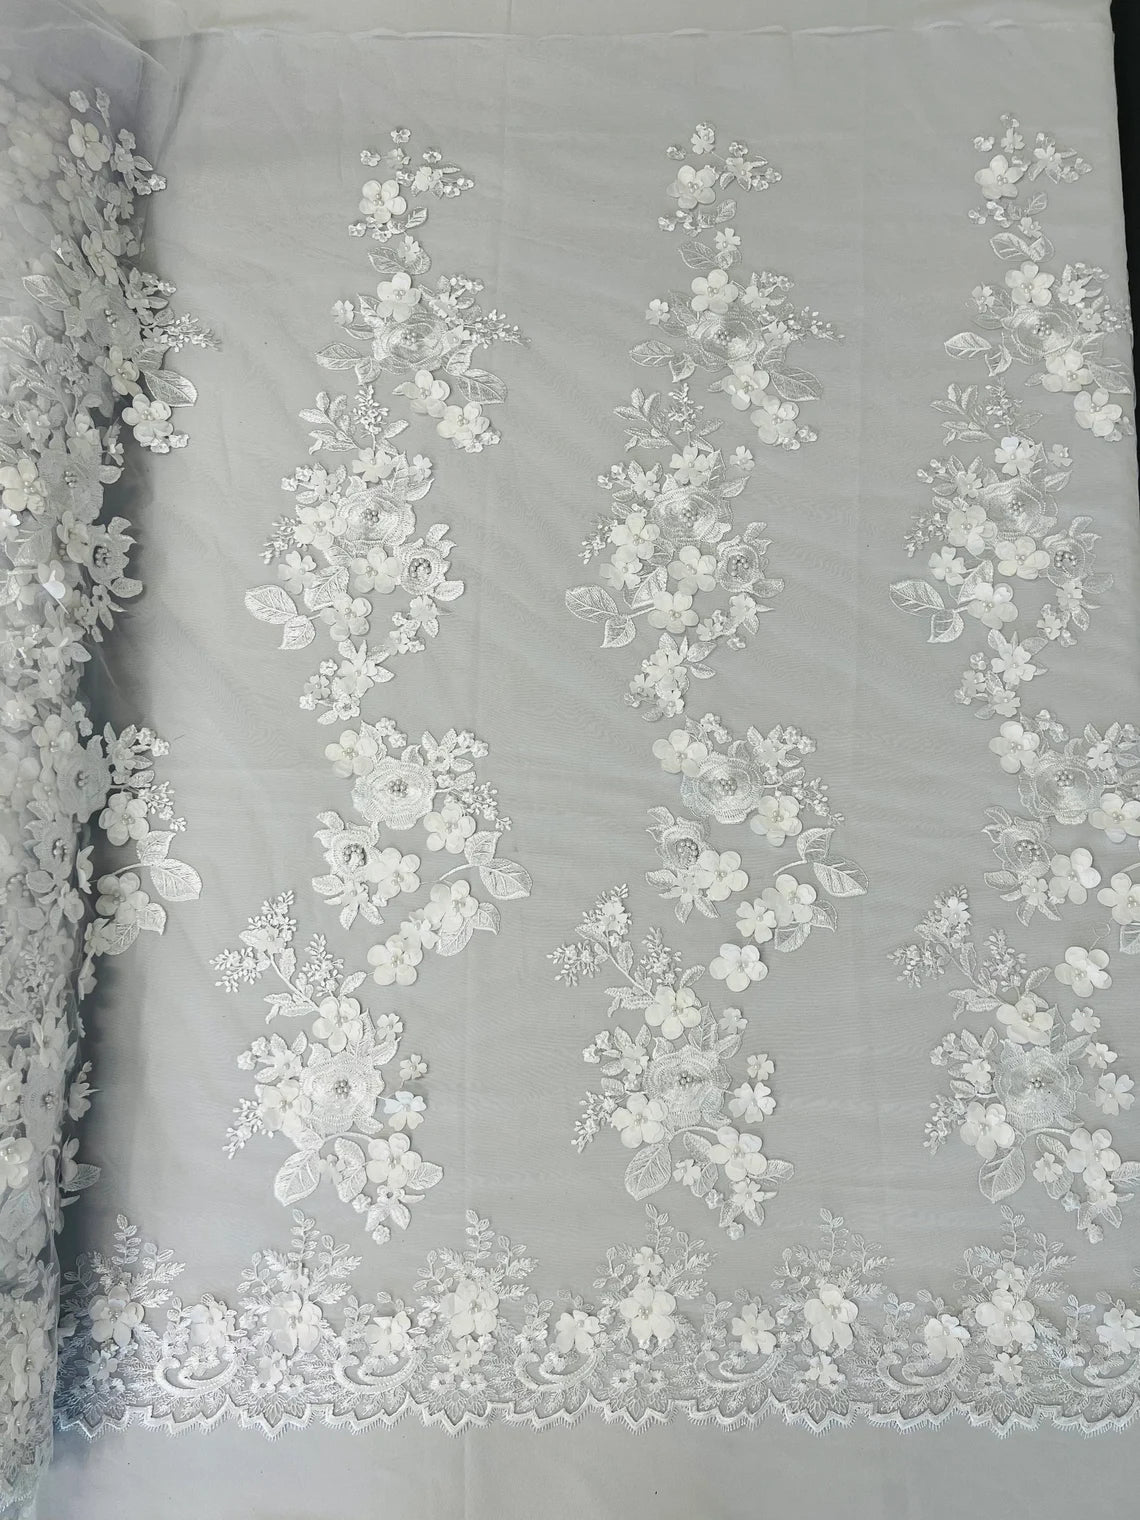 3D Flower Panels Fabric - White - Flower Panels Bead Embroidered on Lace Fabric Sold By Yard